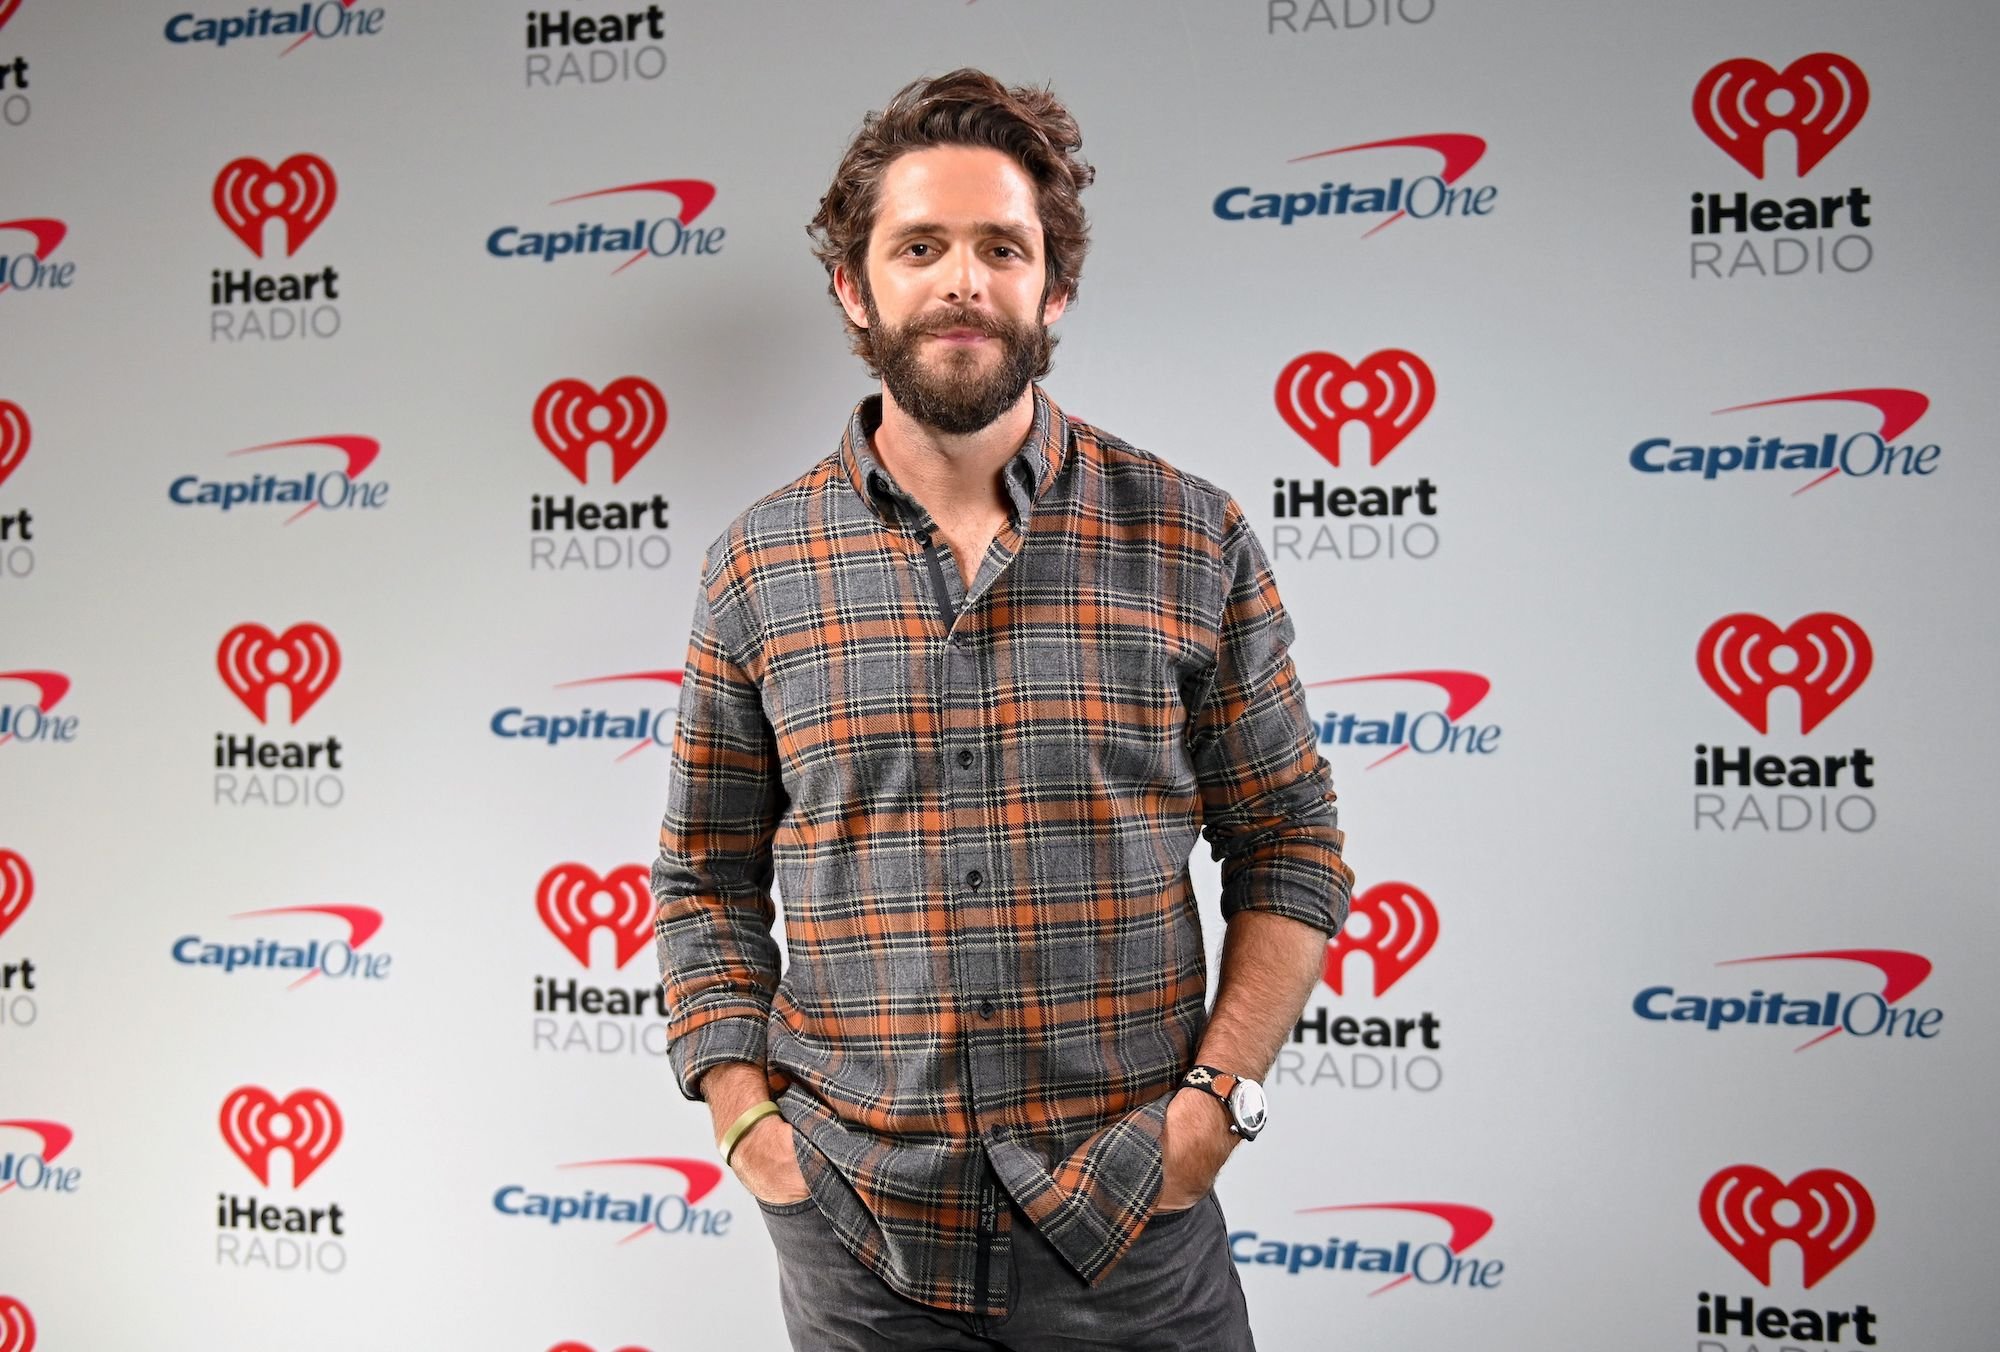 Thomas Rhett smiling in front of a white background with repeating logos